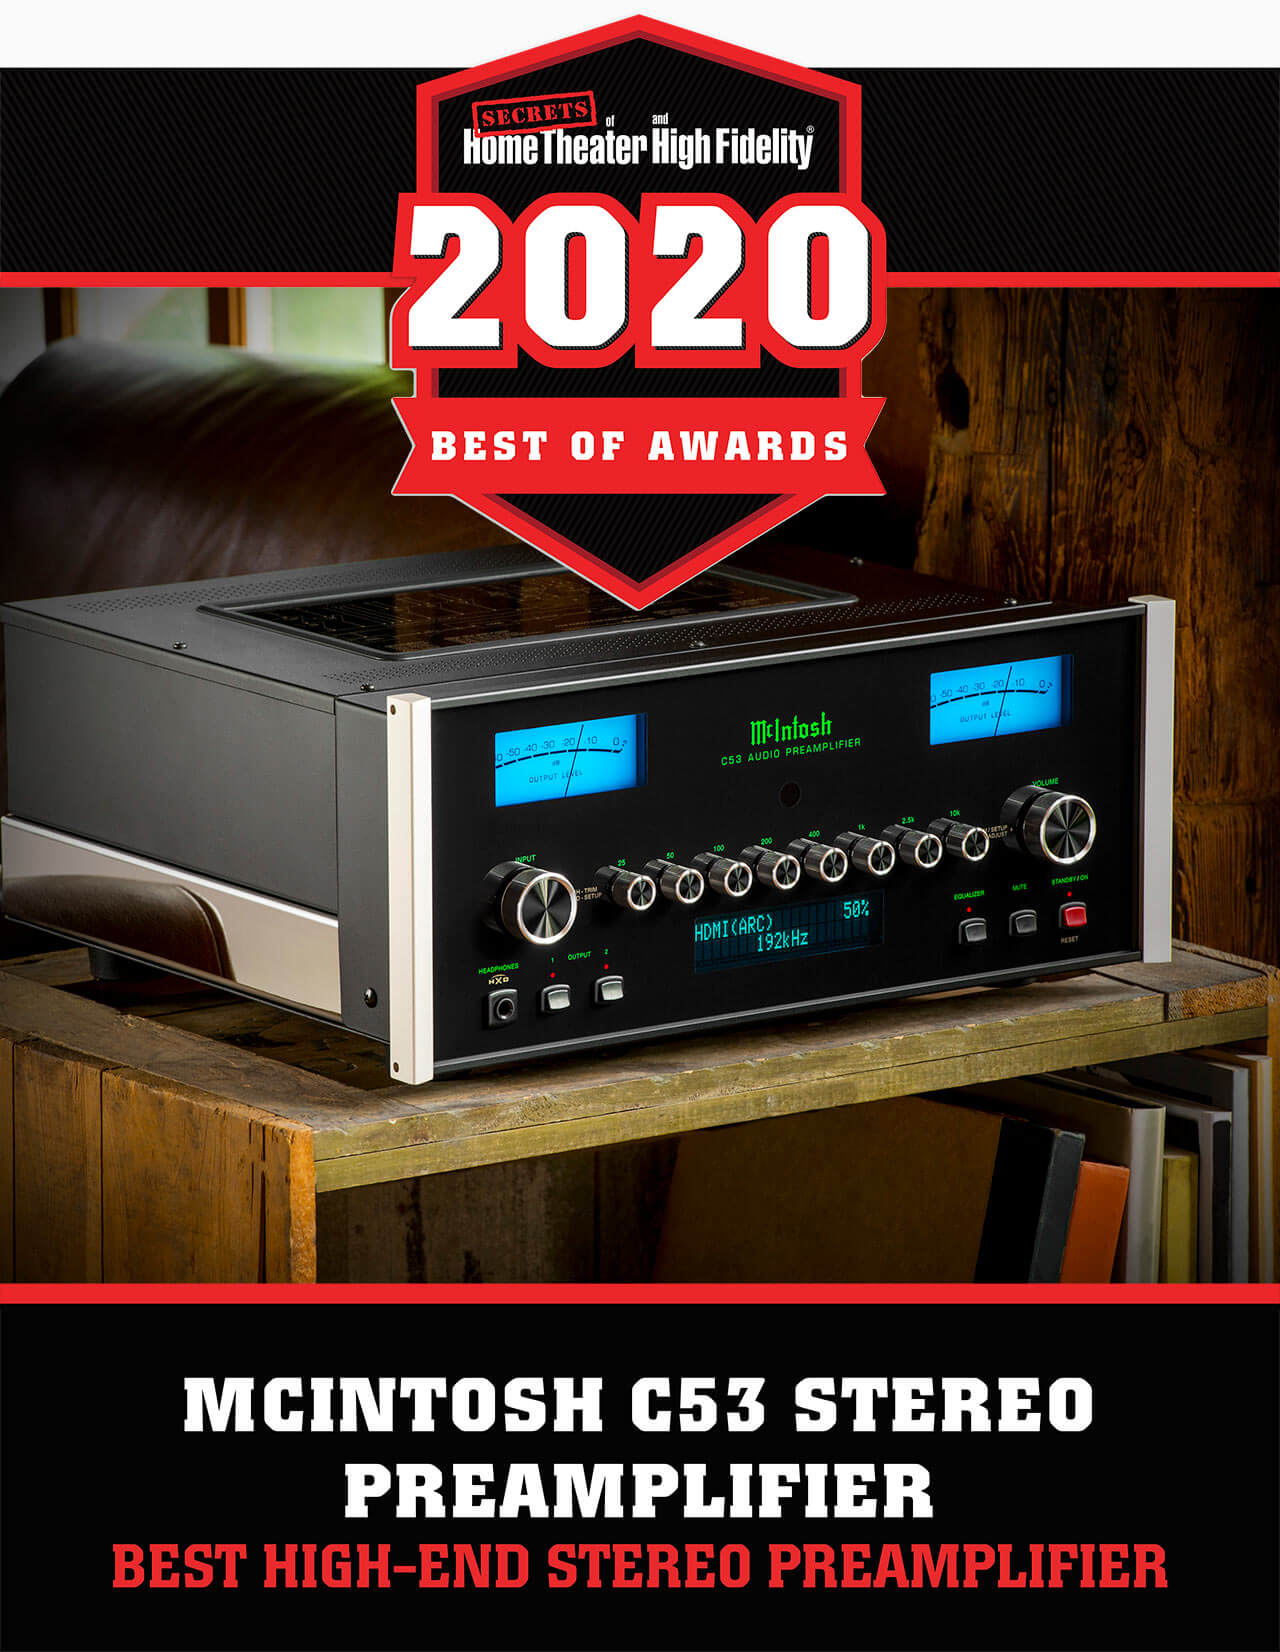 McIntosh C53 Named 2020 Best High-End Stereo Preamplifier